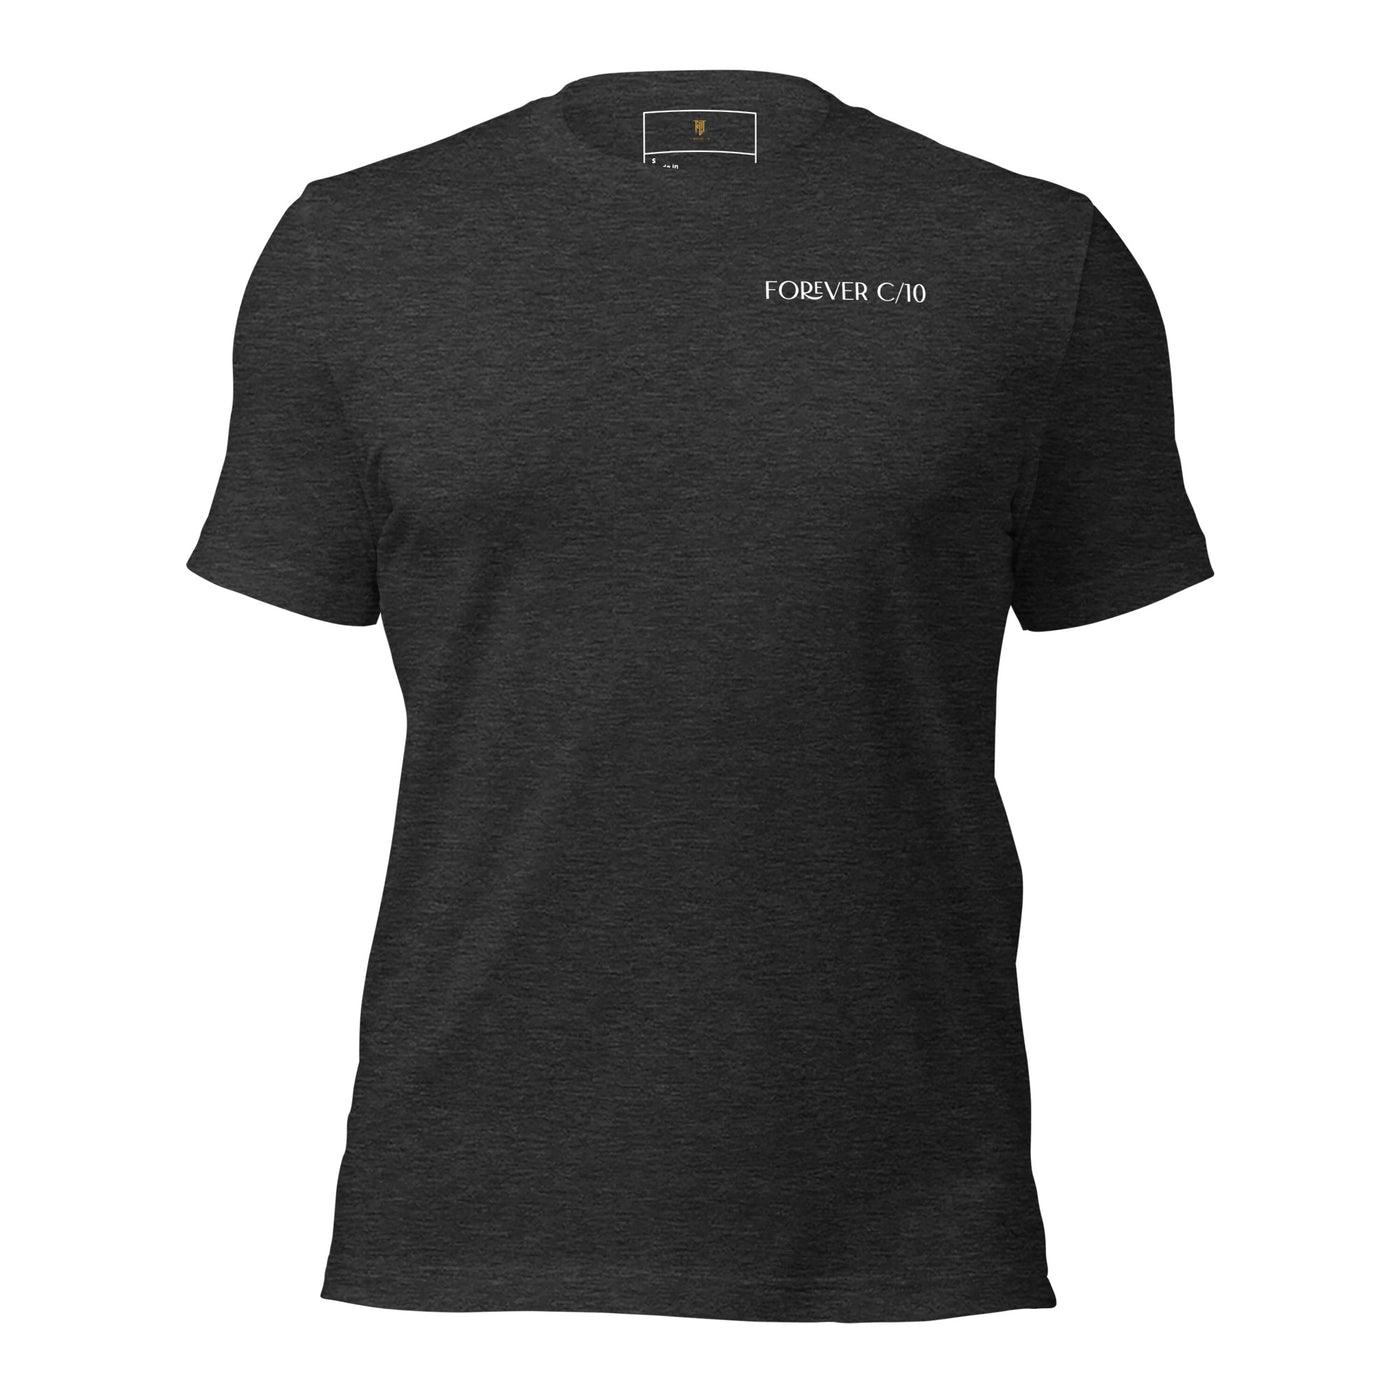 GEN 1 GREY LOW UNISEX T-SHIRT ( BACK PRINT ), Fashion-forward Unisex T-shirt Trends, Sustainable Unisex Tees, Casual Unisex T-shirts, Contemporary Unisex Tee Shirts, Unisex t-shirt